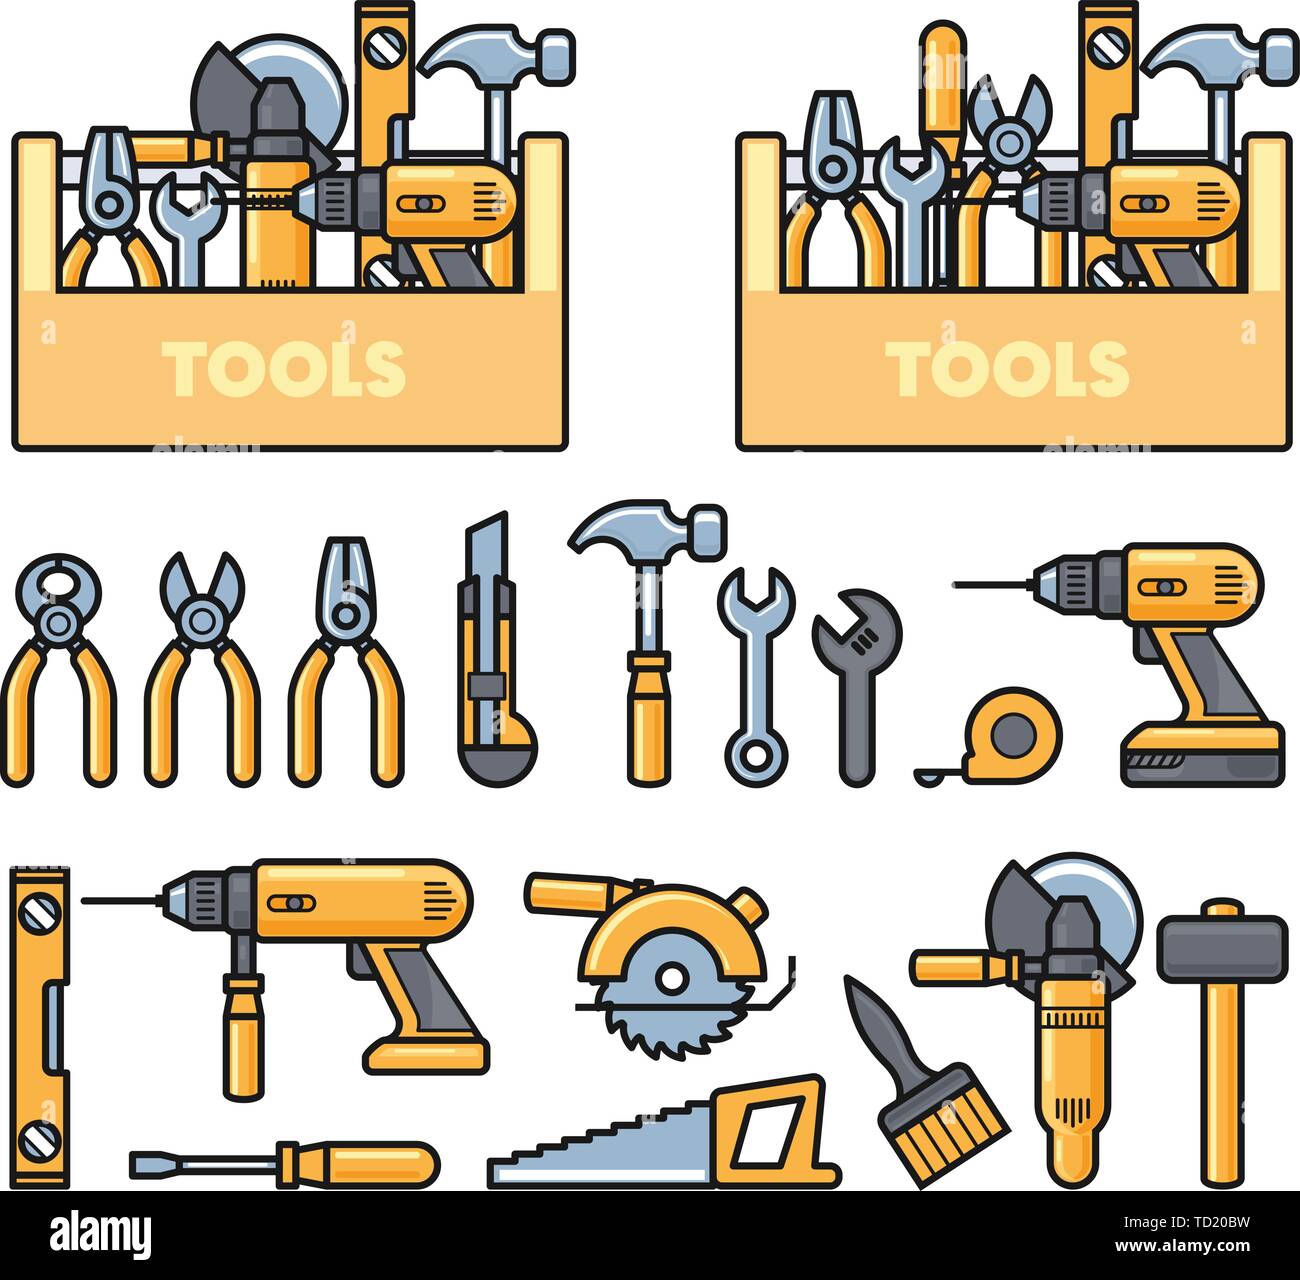 Work tools icons - toolbox, puncher, drill, wrench, plane, saw, pliers and construction tools kit Stock Vector